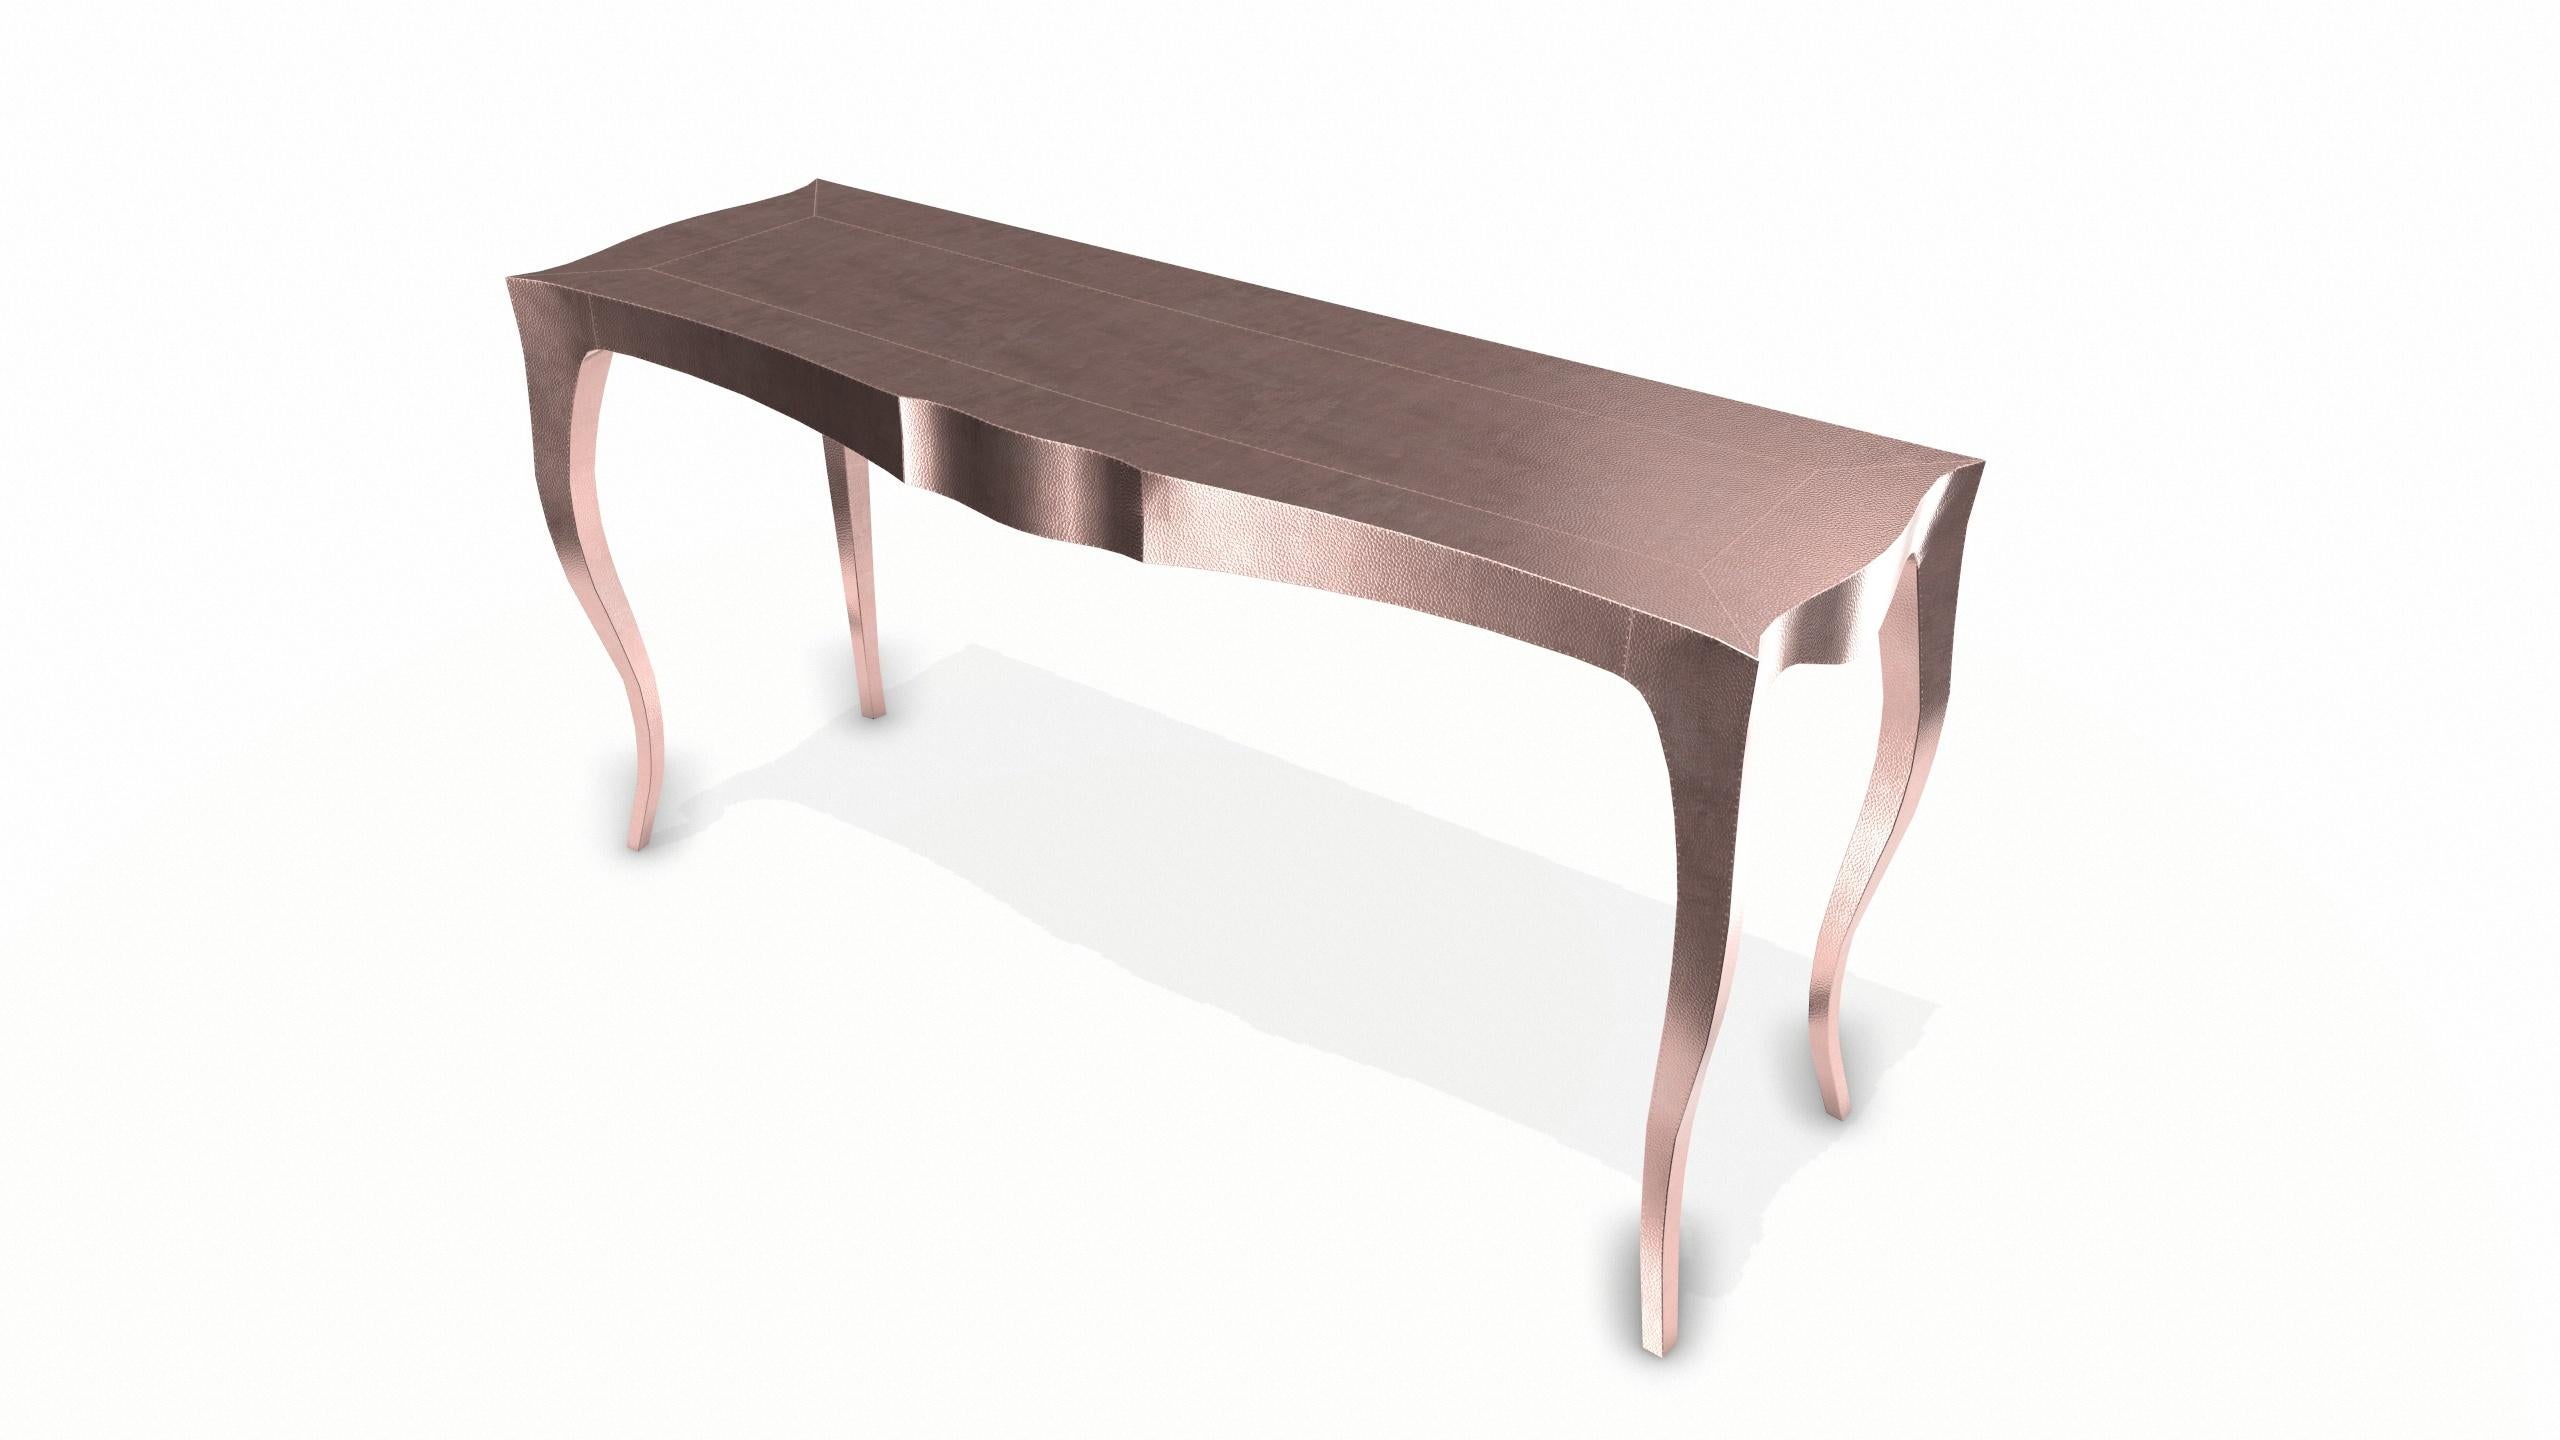 Other Louise Console Art Deco Side Tables Mid. Hammered Copper by Paul Mathieu  For Sale